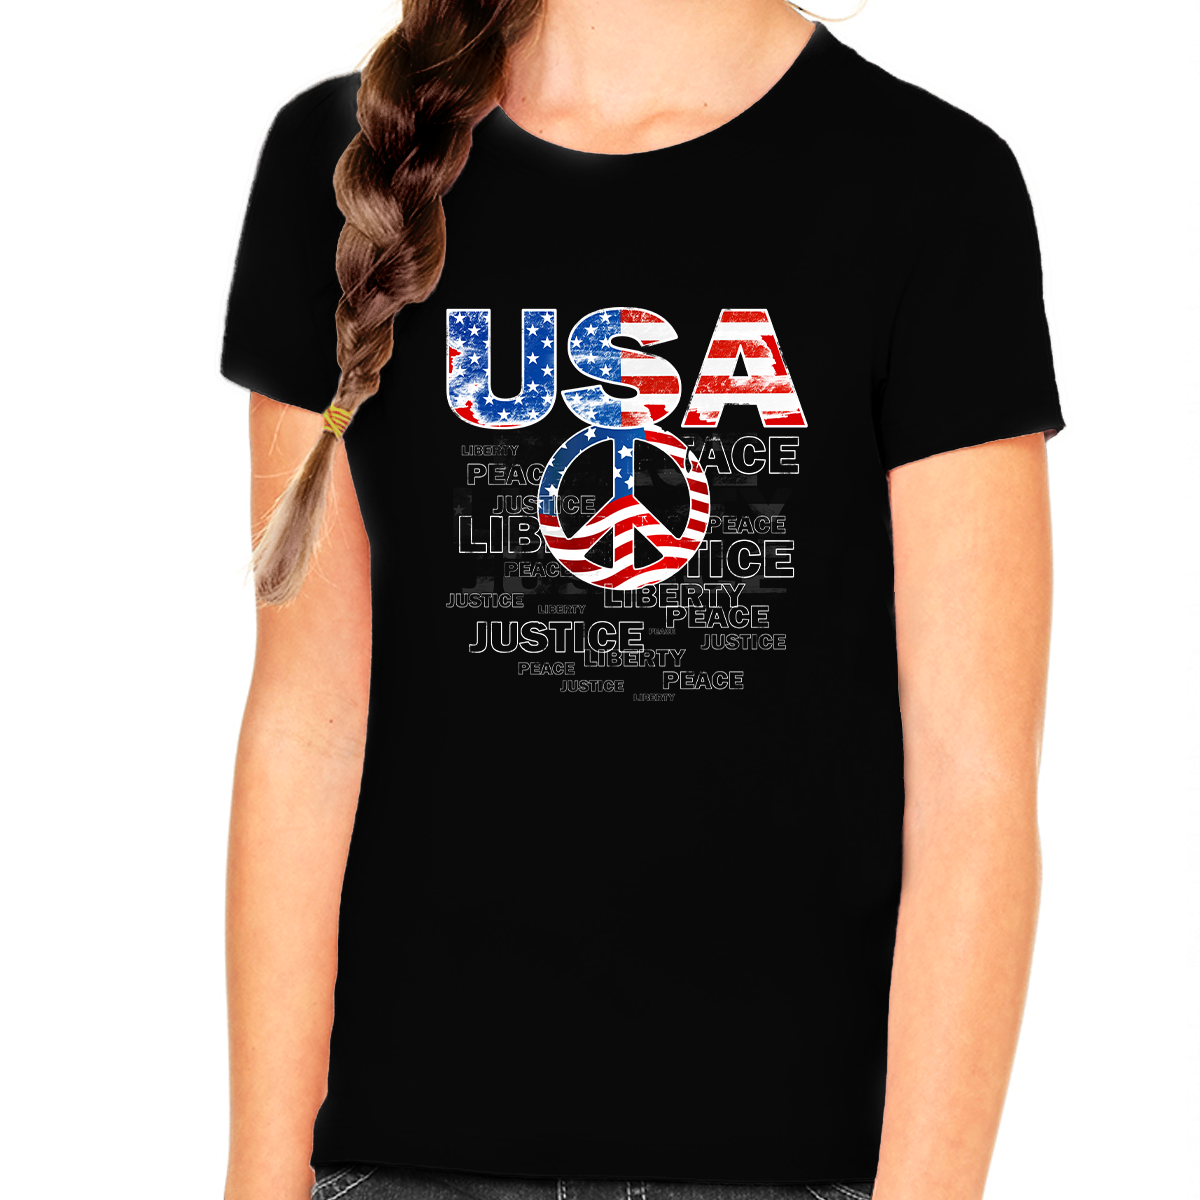 4th of July Shirts for Girls USA Shirt Patriotic Shirts for Girls Peace Sign US Flag American Flag Shirt - Fire Fit Designs